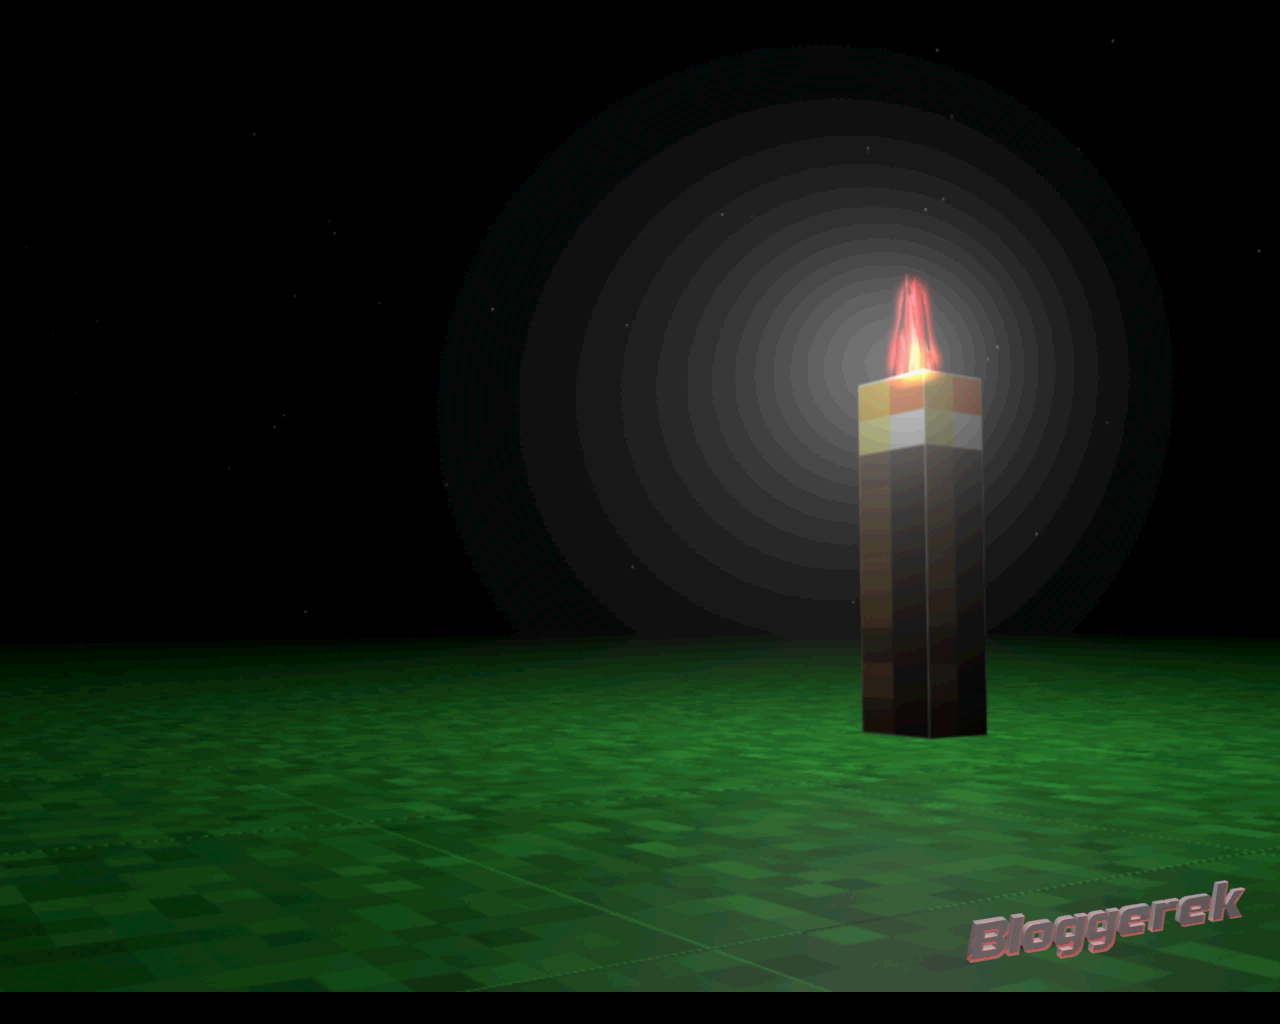 BloggerekPicture MC Torch.png